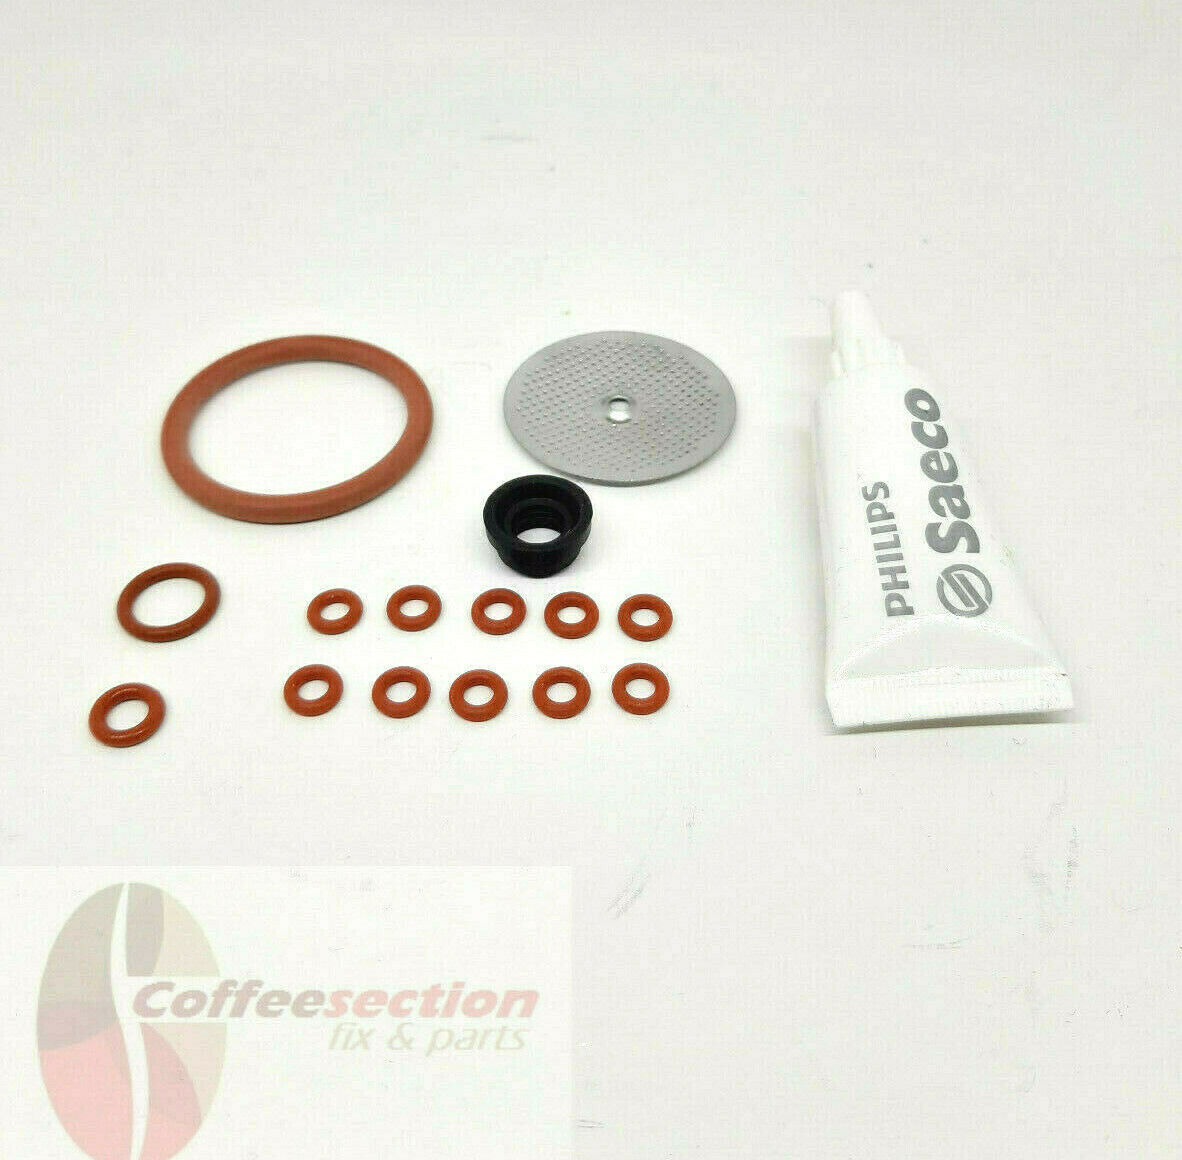 10x O-ring Gasket For Pump Connection Saeco-Set 4 